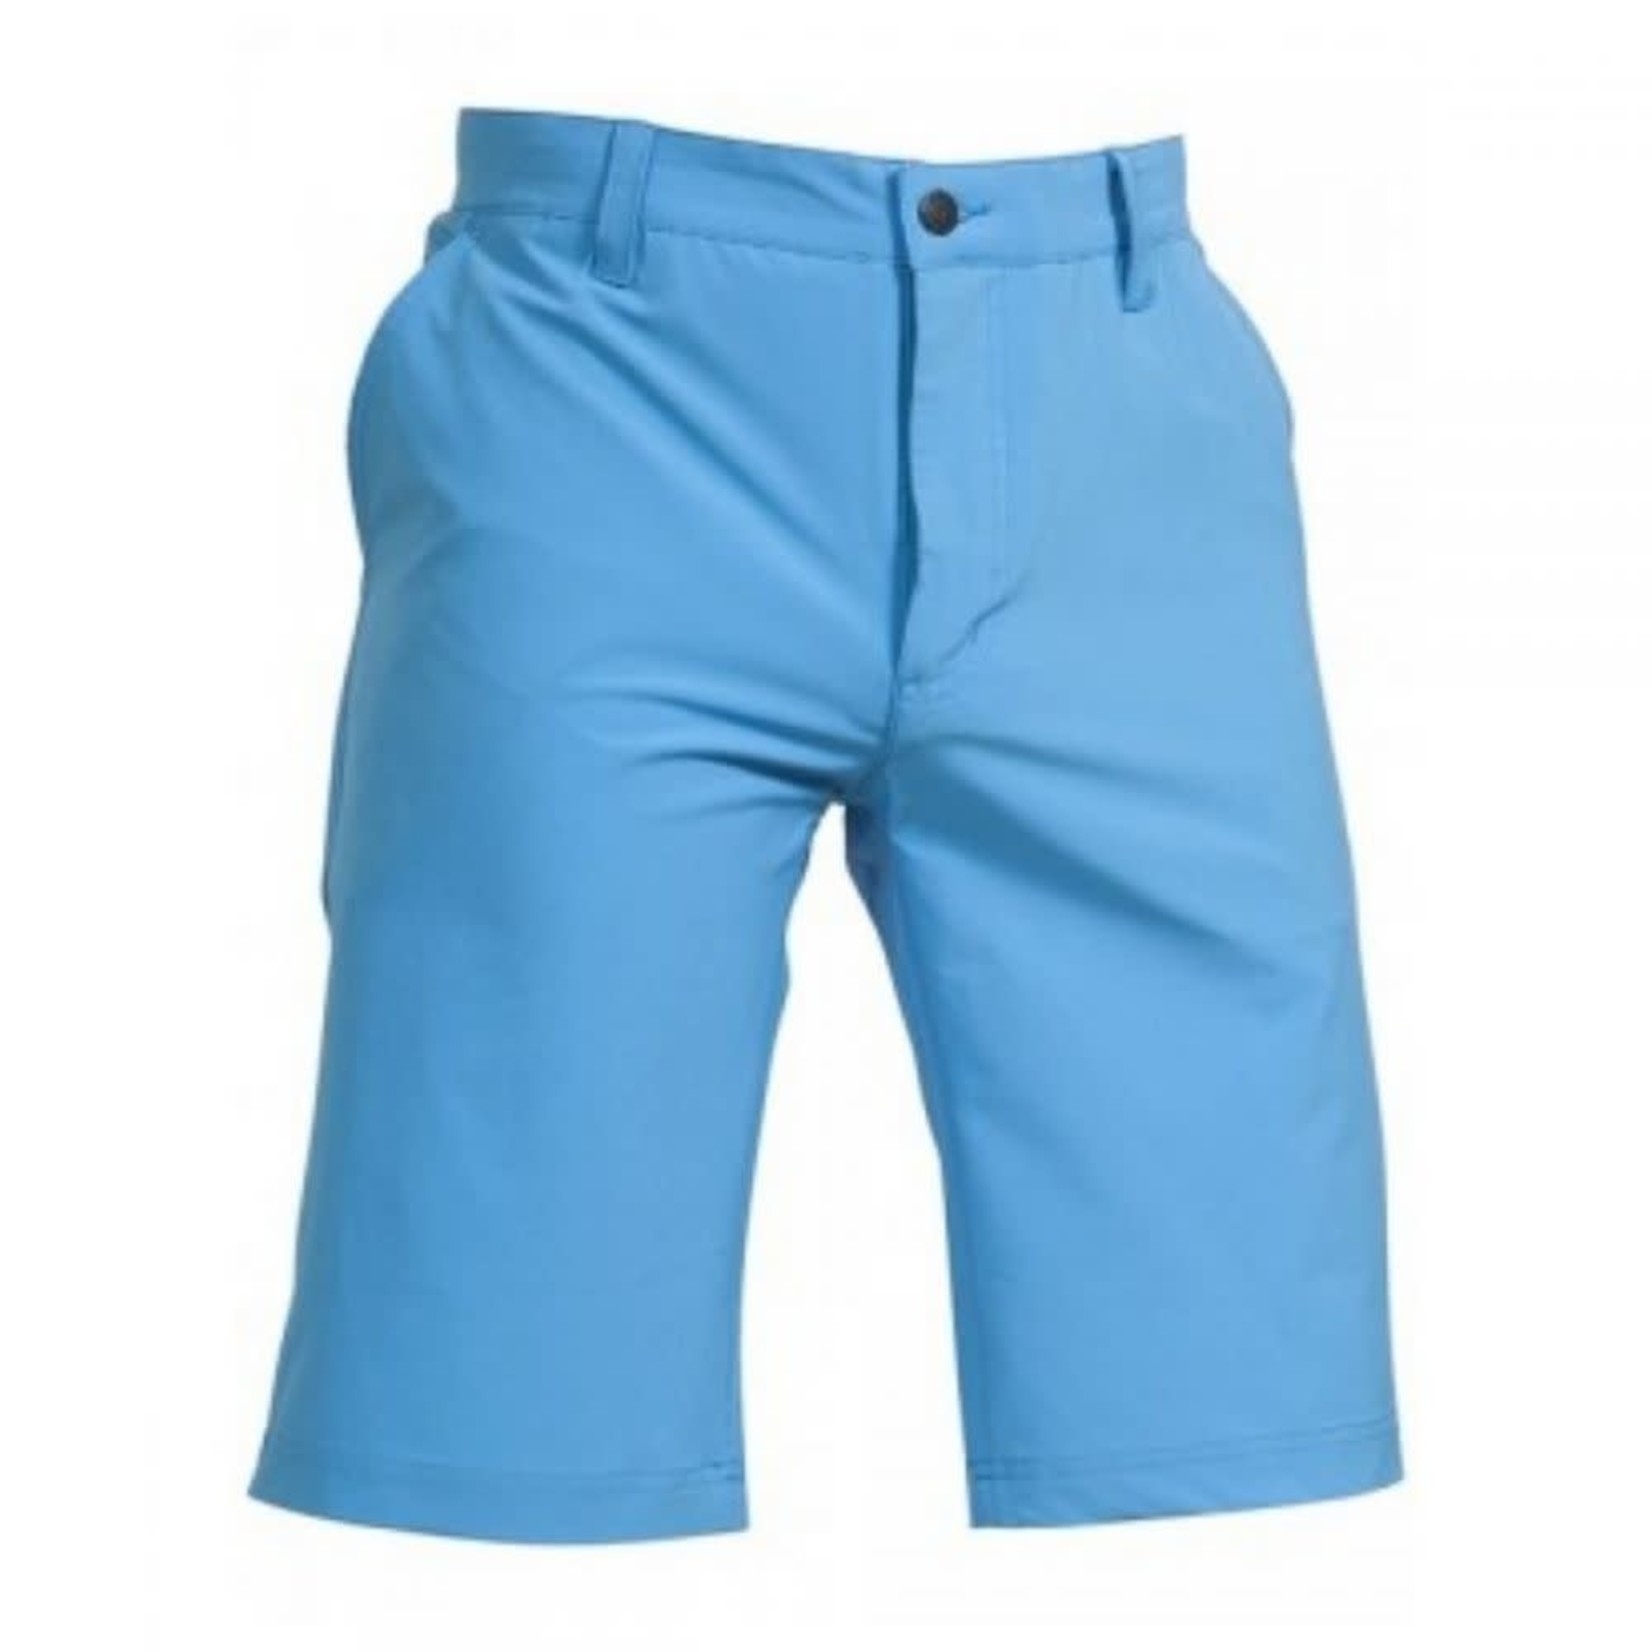 Backtee Backtee Performance Shorts - Blue 48